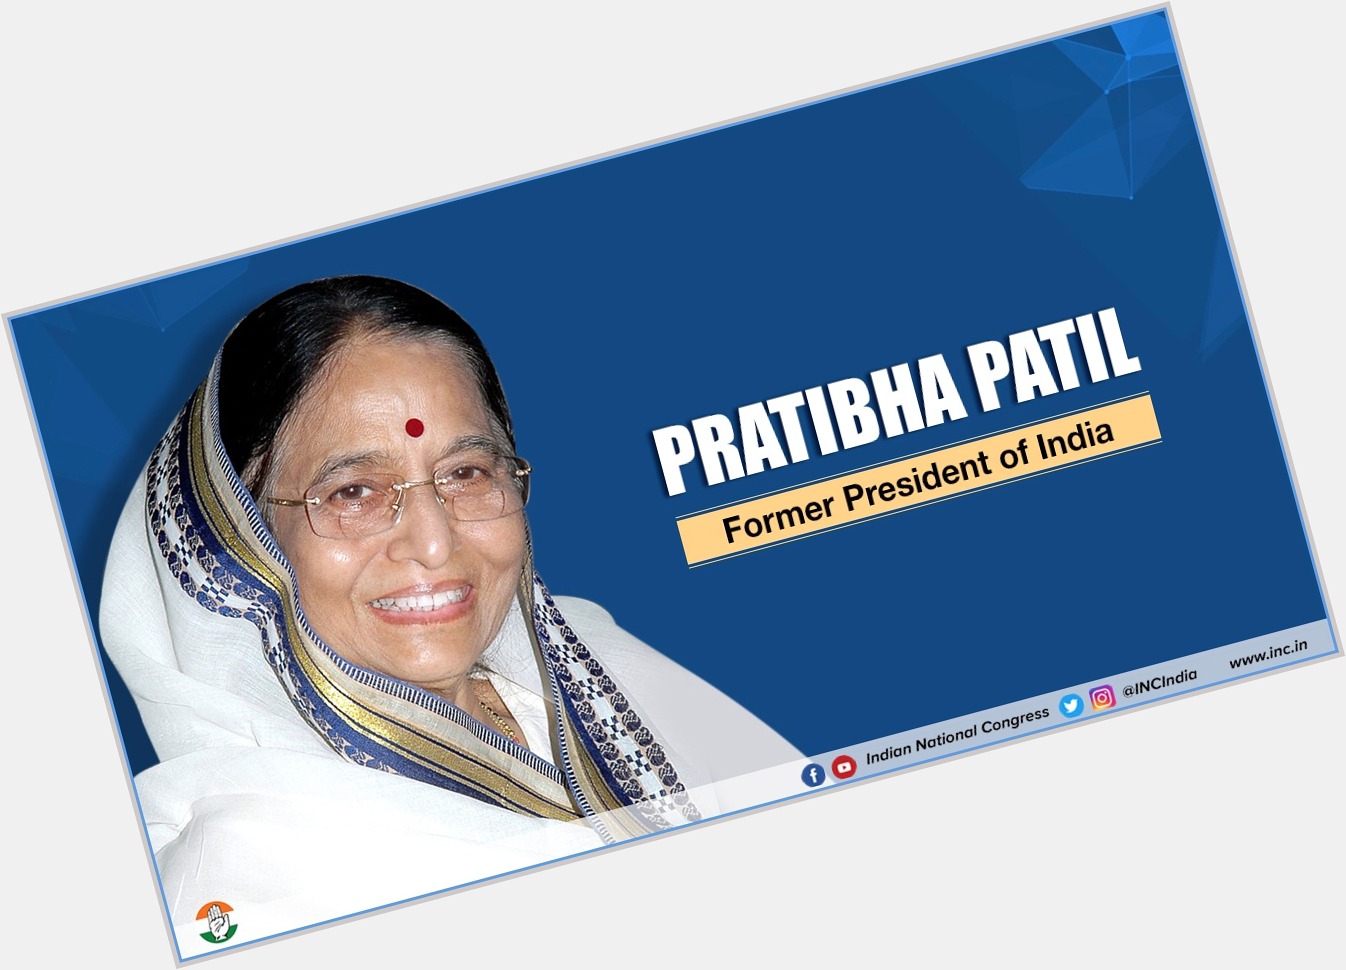 We wish the Former President Smt. Pratibha Patil a Happy Birthday! Her grace, dignity & humility inspires us all. 